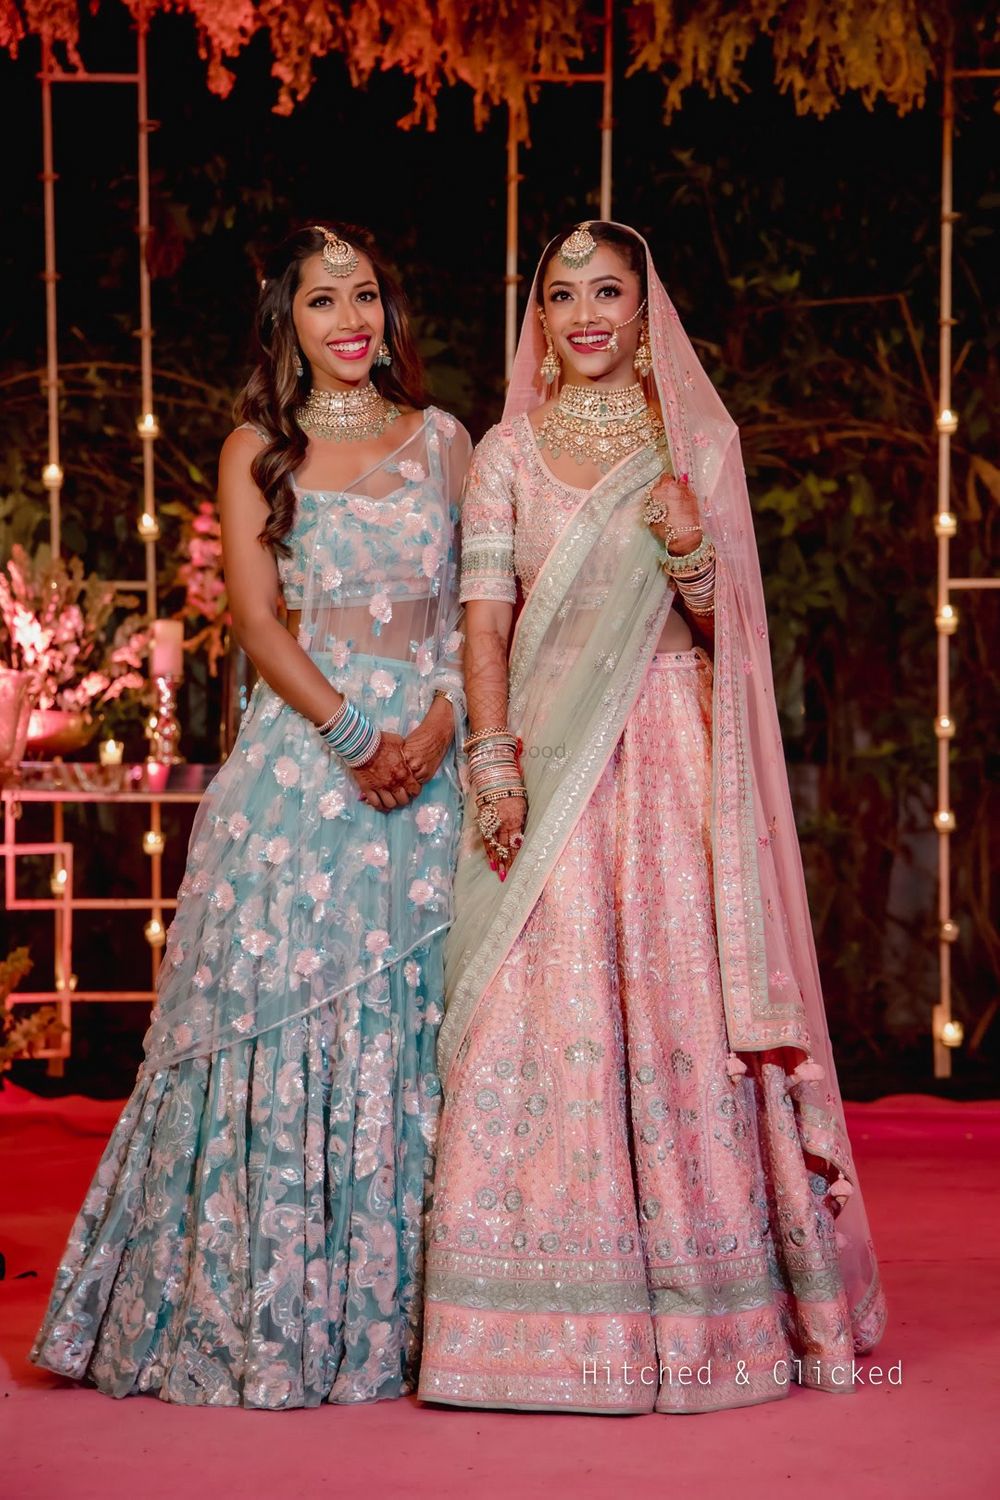 Photo of bride with her sister wearing contrasting outfits